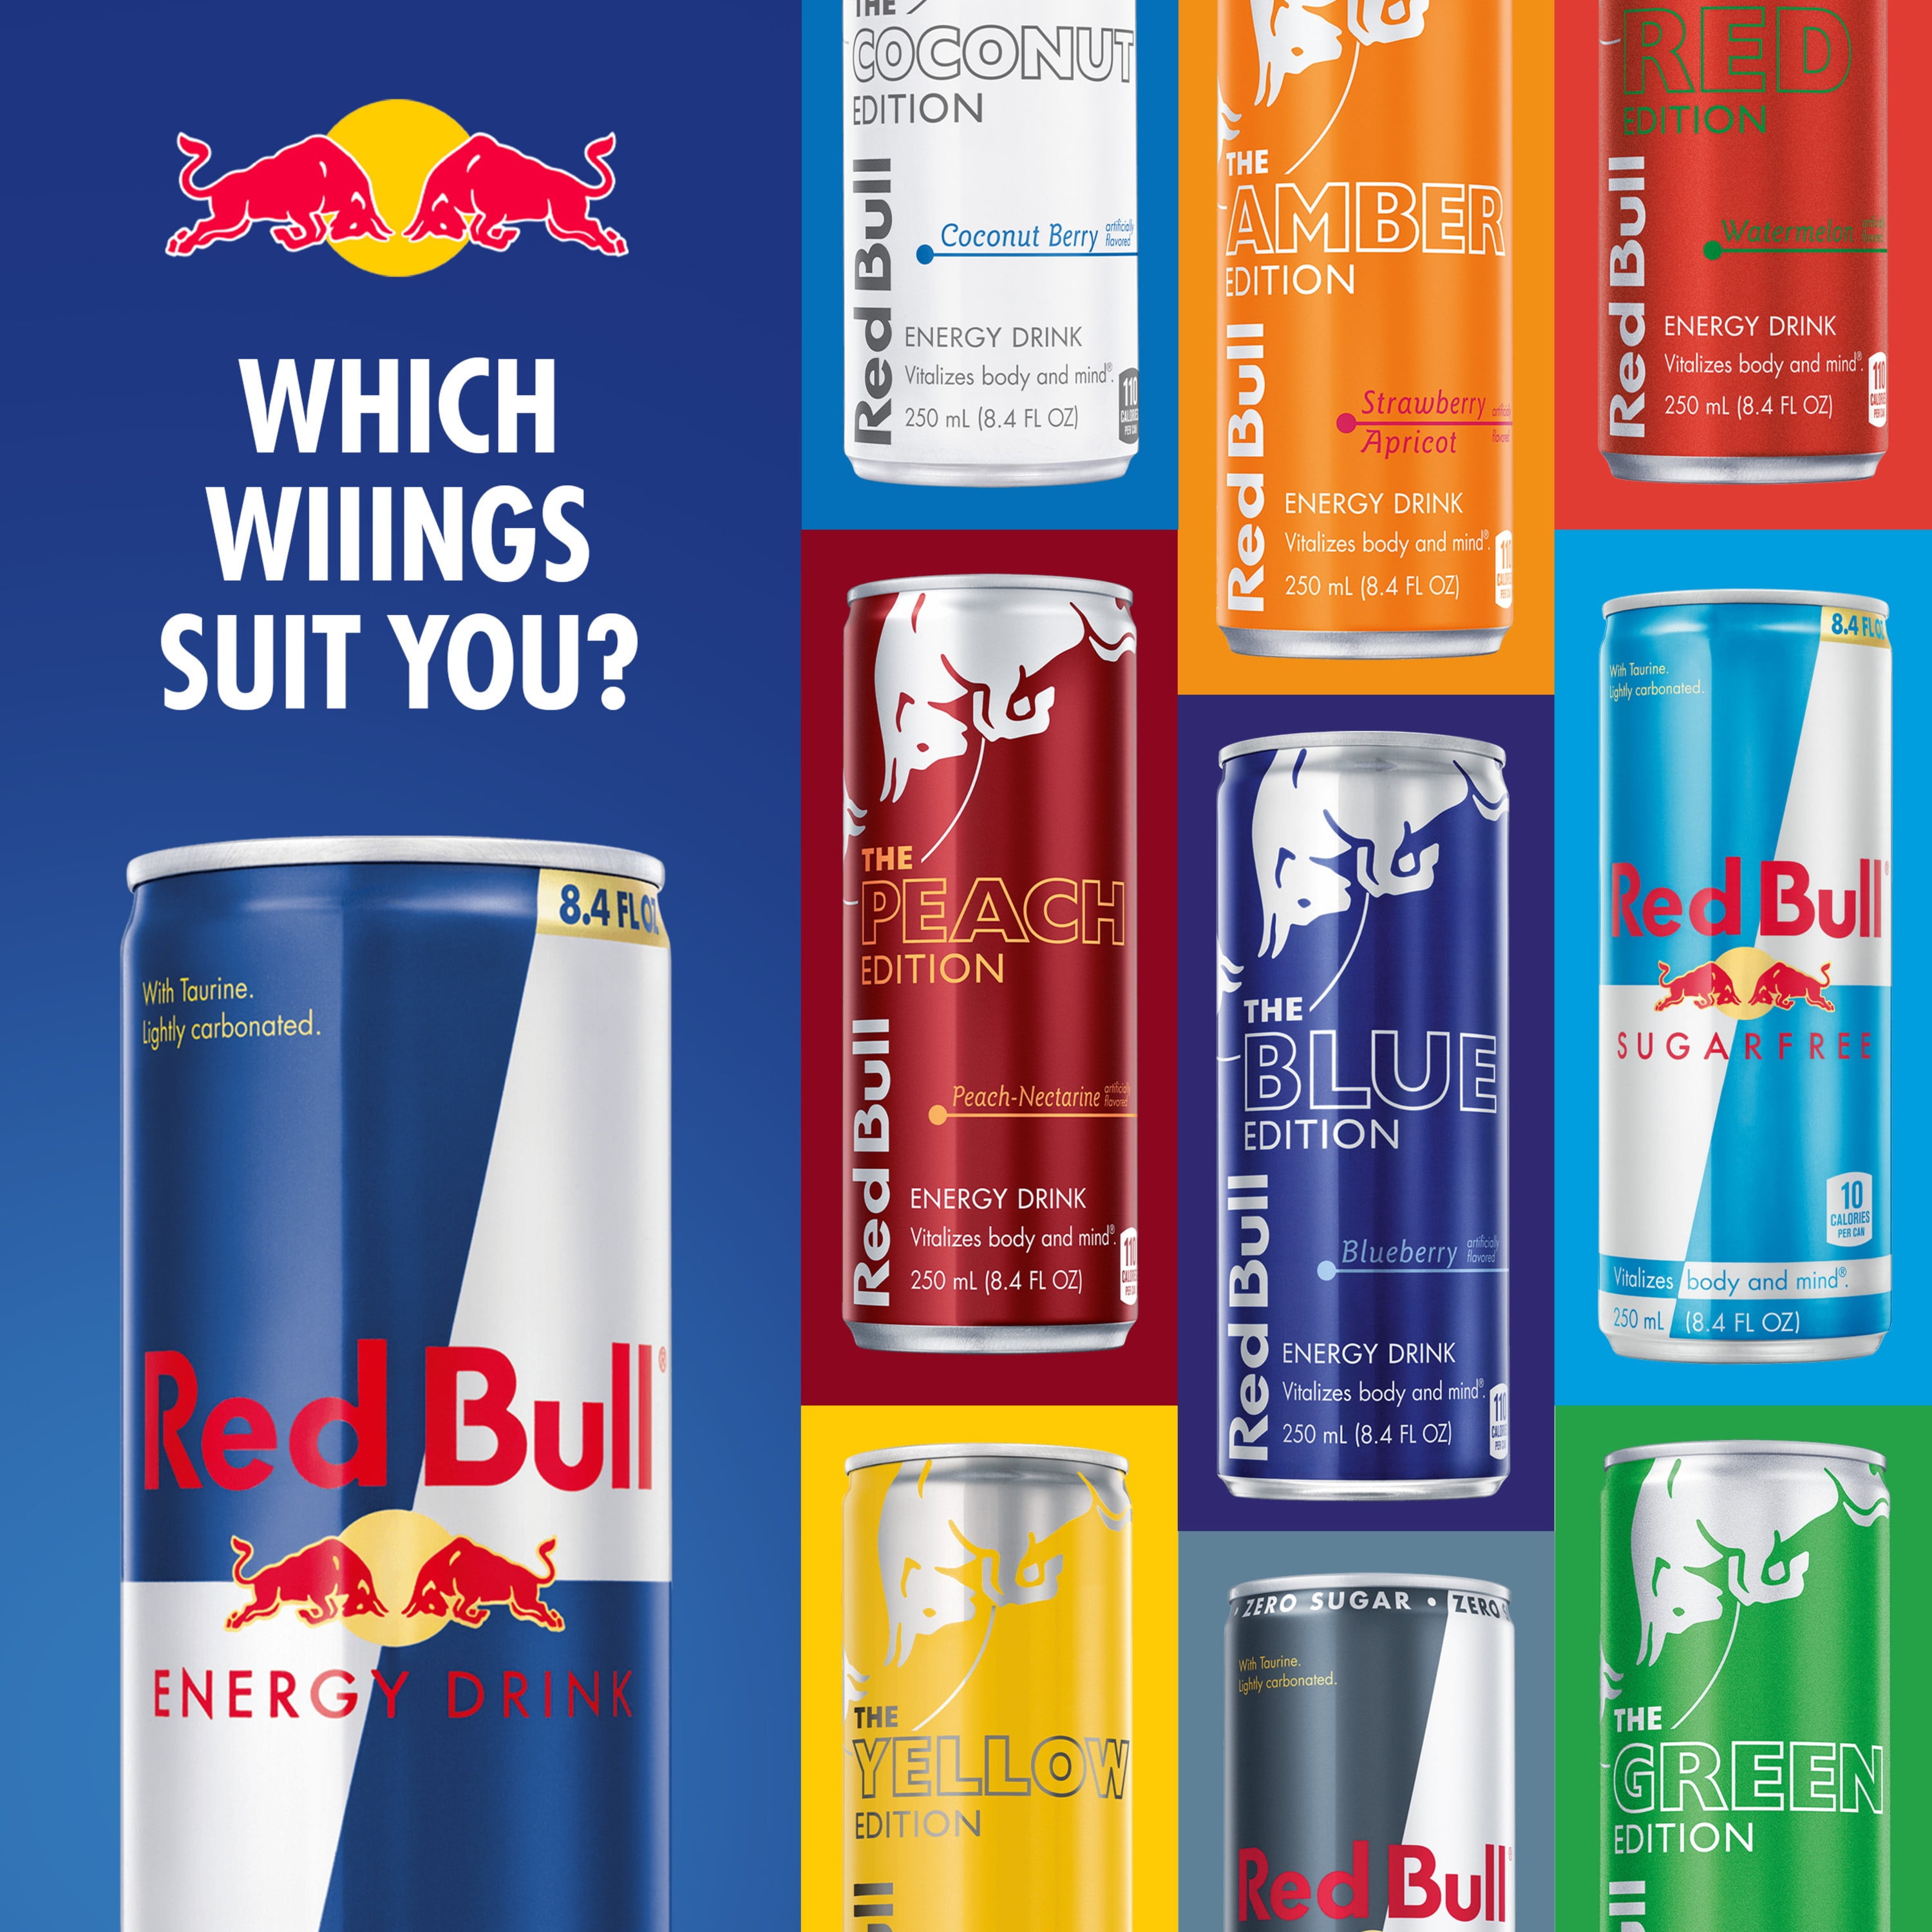 Product “Red Bull - Energy Drink ”